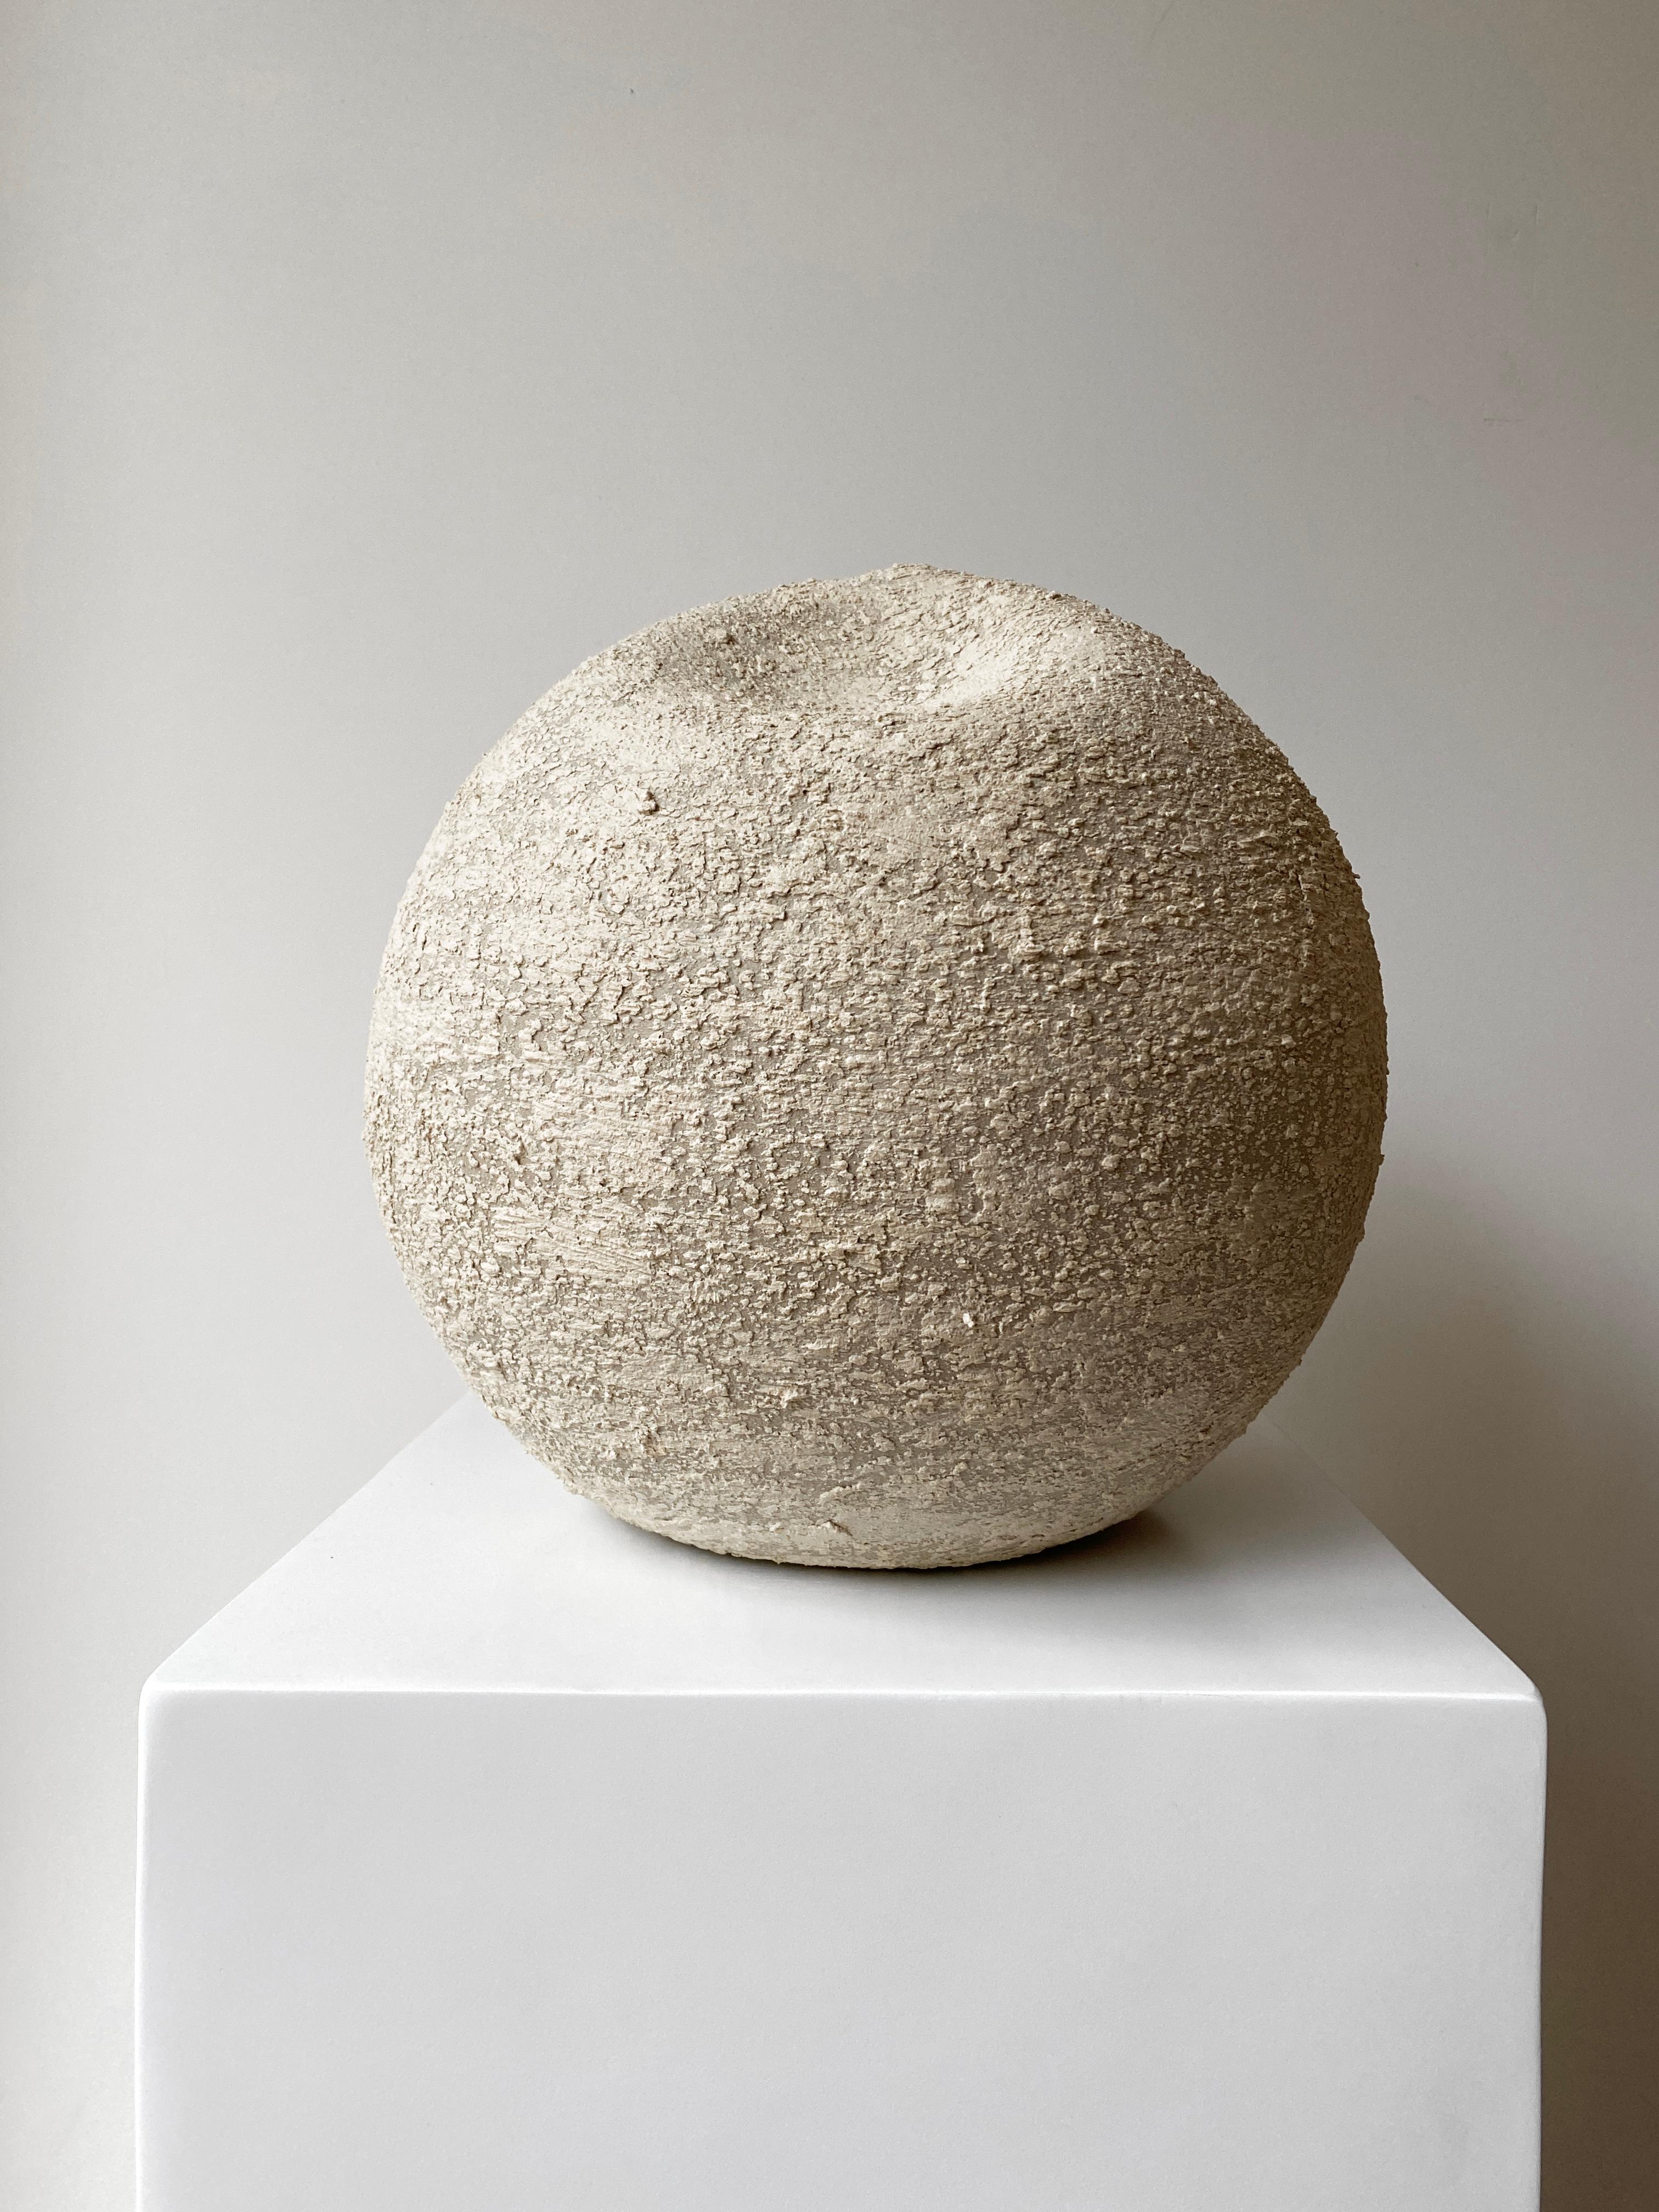 White rock soft moon by Laura Pasquino
Dimensions: Ø 33 x H 32 cm, opening Ø 3 cm
Materials: stoneware ceramic
Finishing: unglazed natural stoneware
Colour: black

Laura Pasquino
Incorporating references from ancient Korean ceramics as well